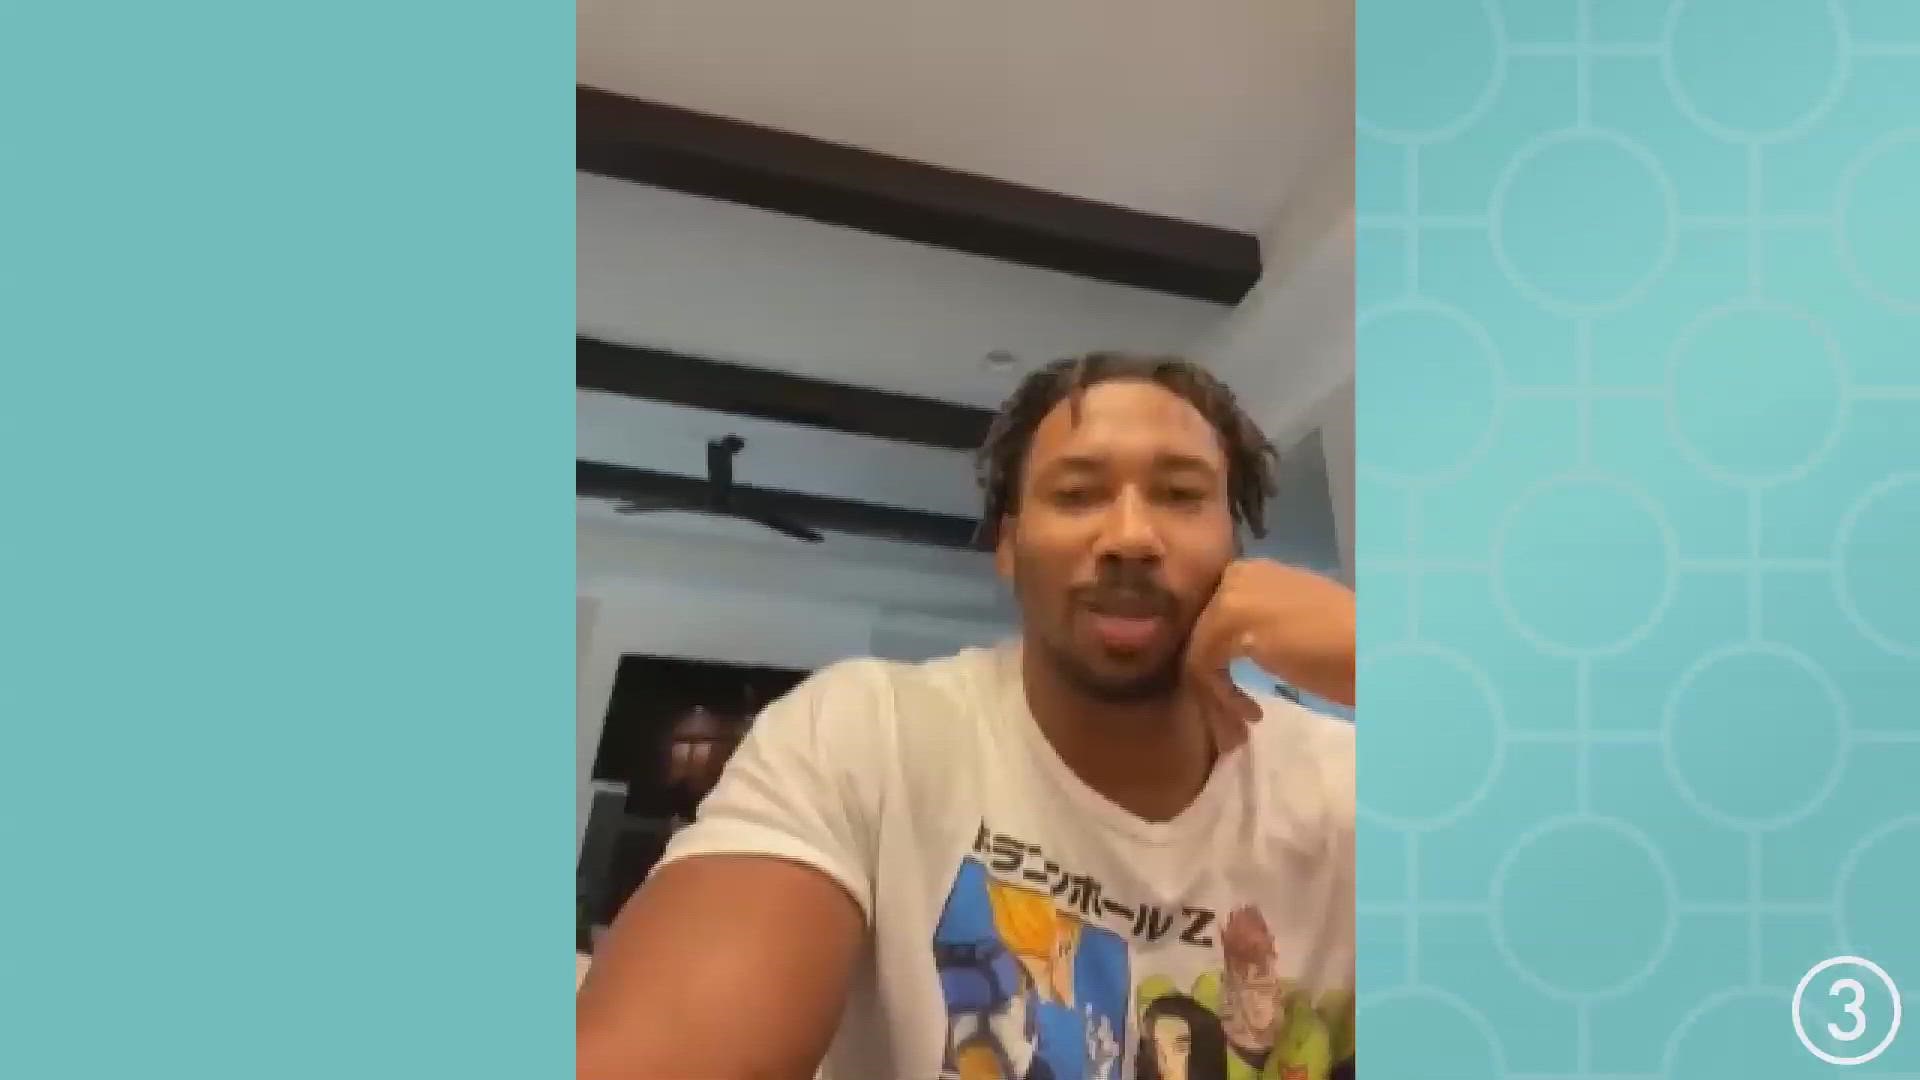 Speaking to reporters on Thursday, Cleveland Browns defensive end Myles Garrett addressed the NFL's response to the civil unrest in the United States.